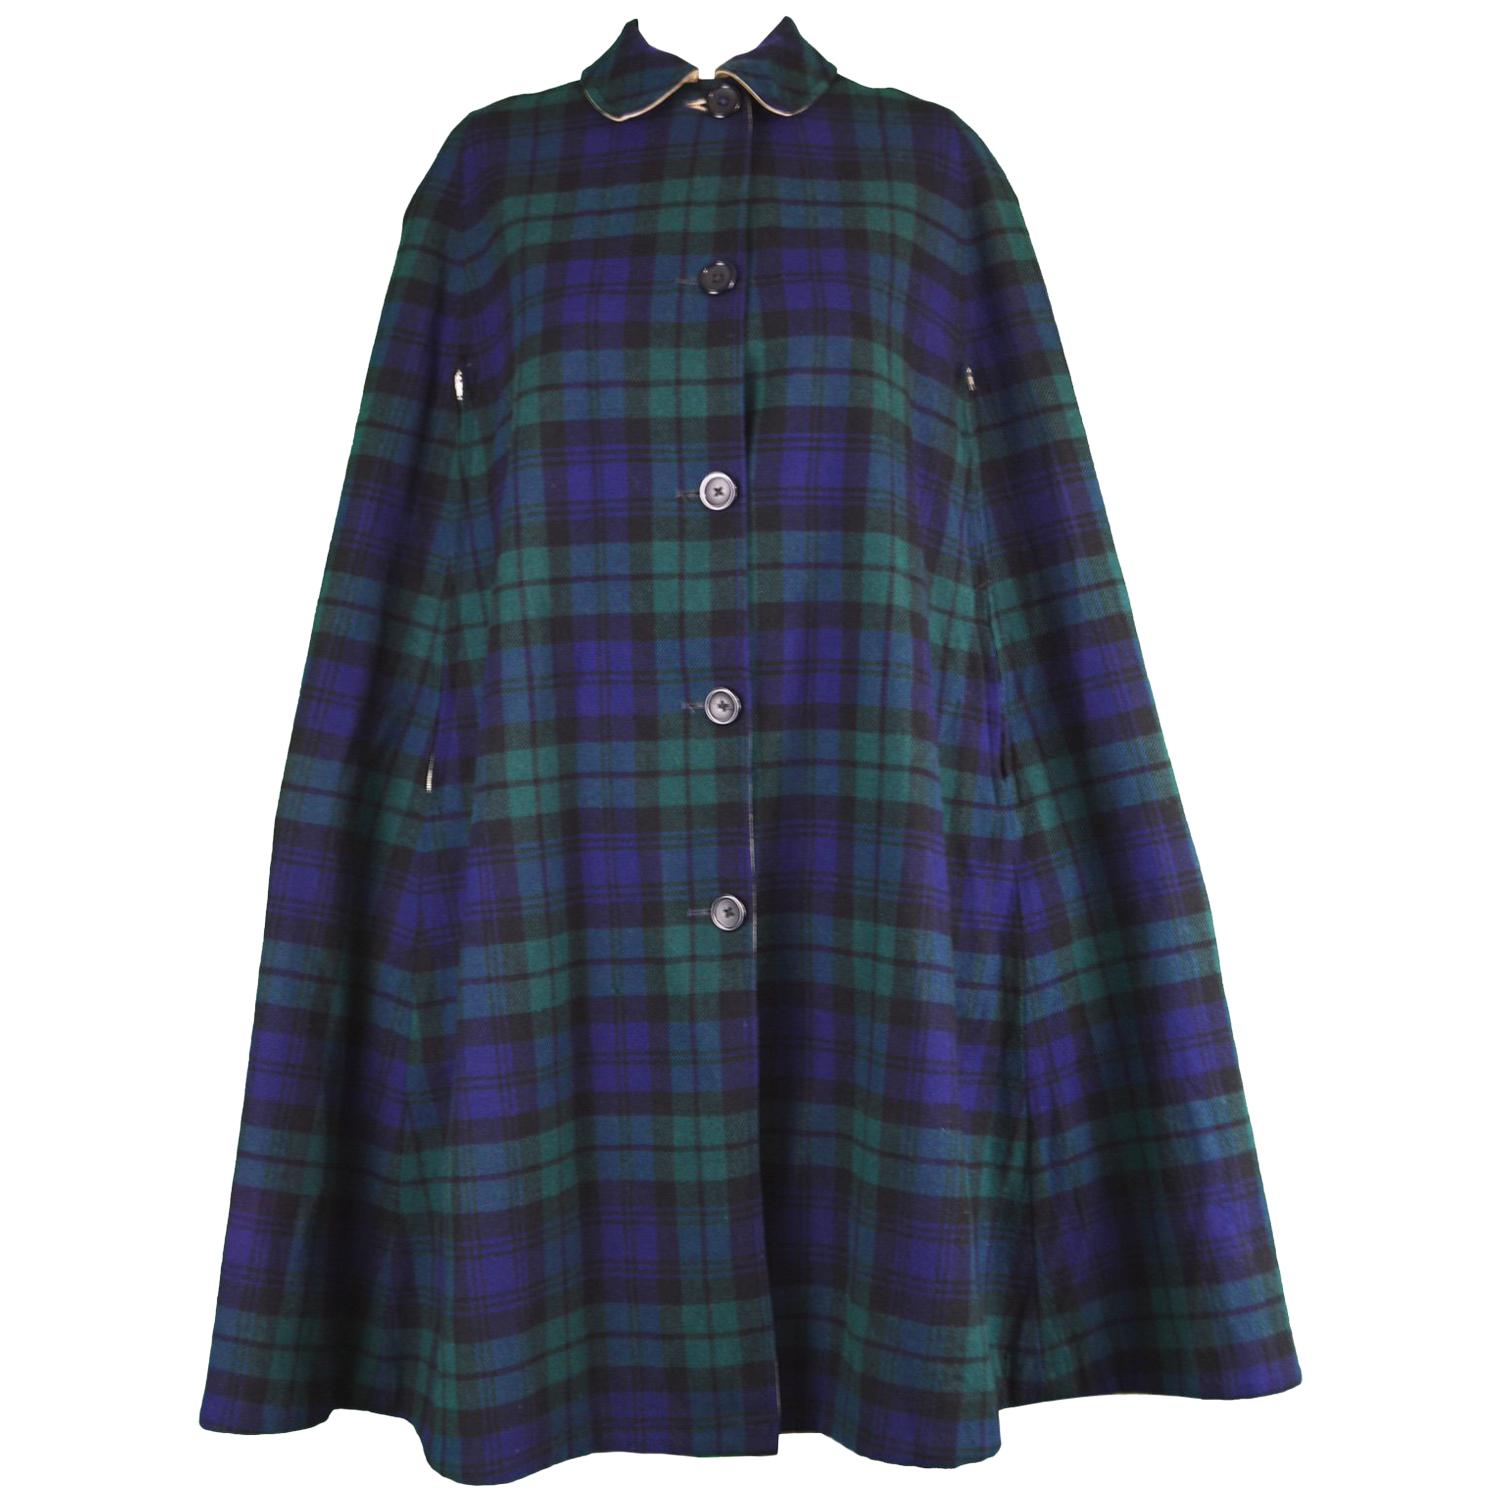 Burberry Vintage 1960s Blue & Green Checked Wool Plaid Cape Coat